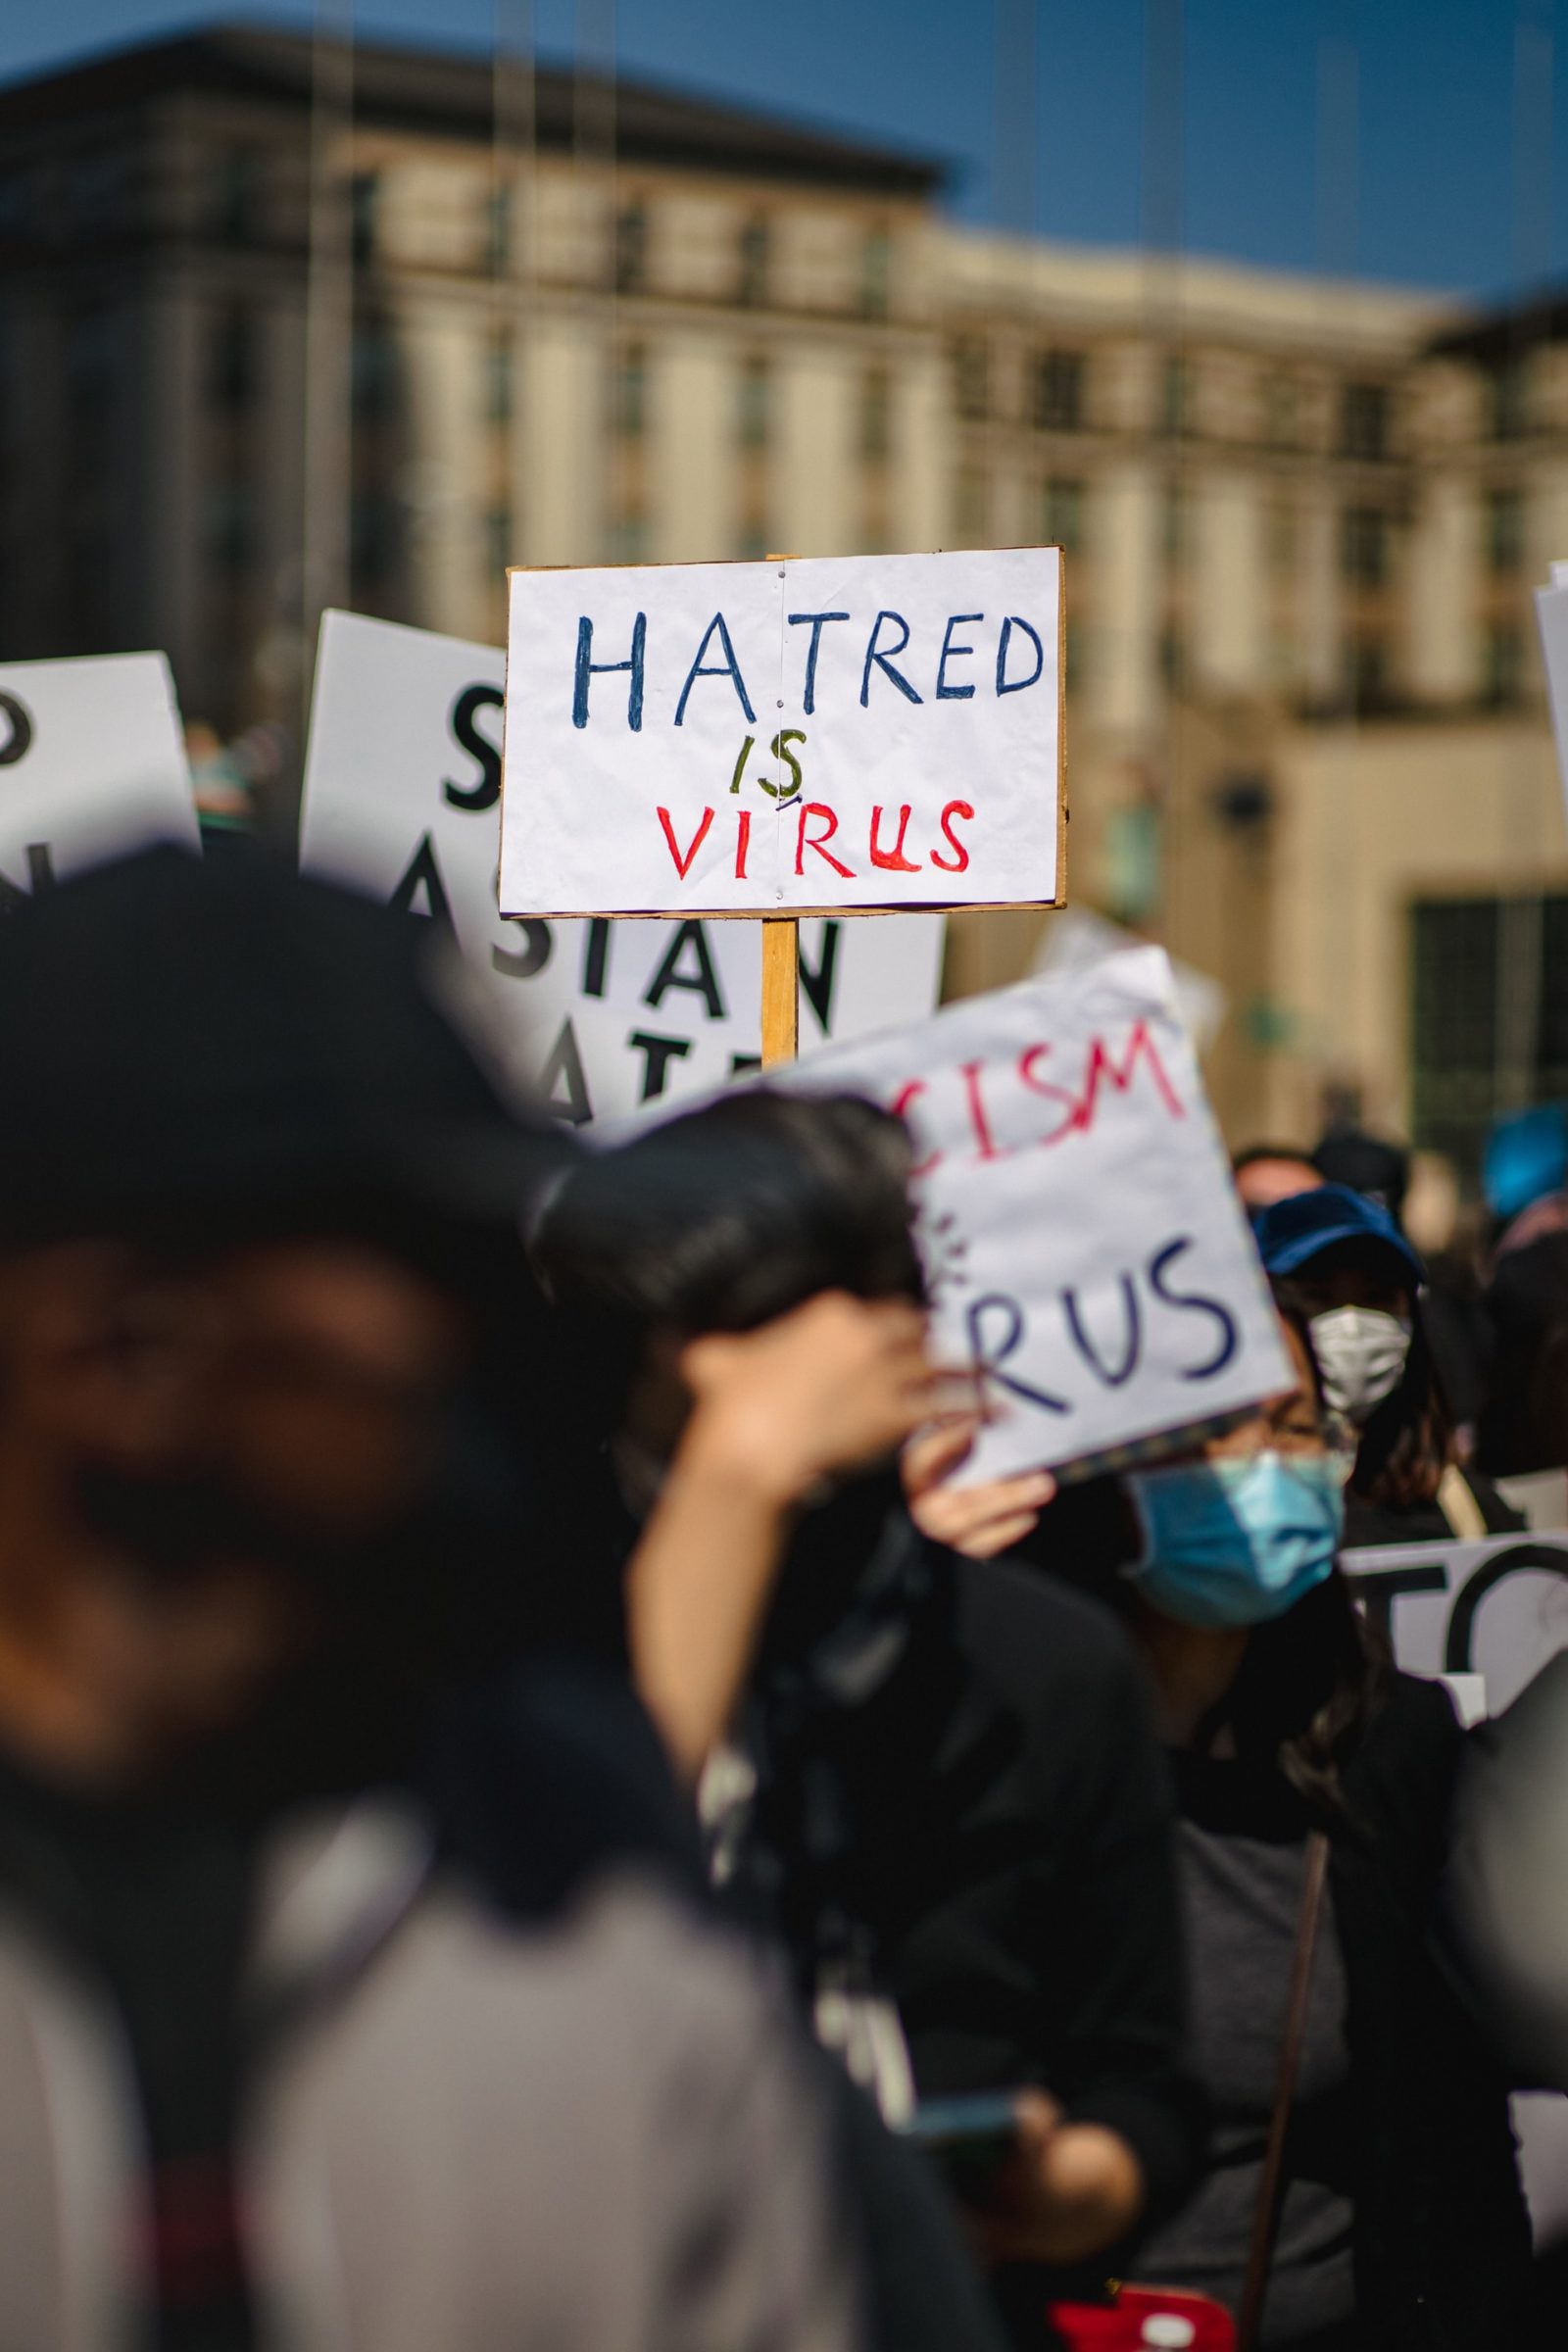 Protesters holding signs: HATRED IS VIRUS